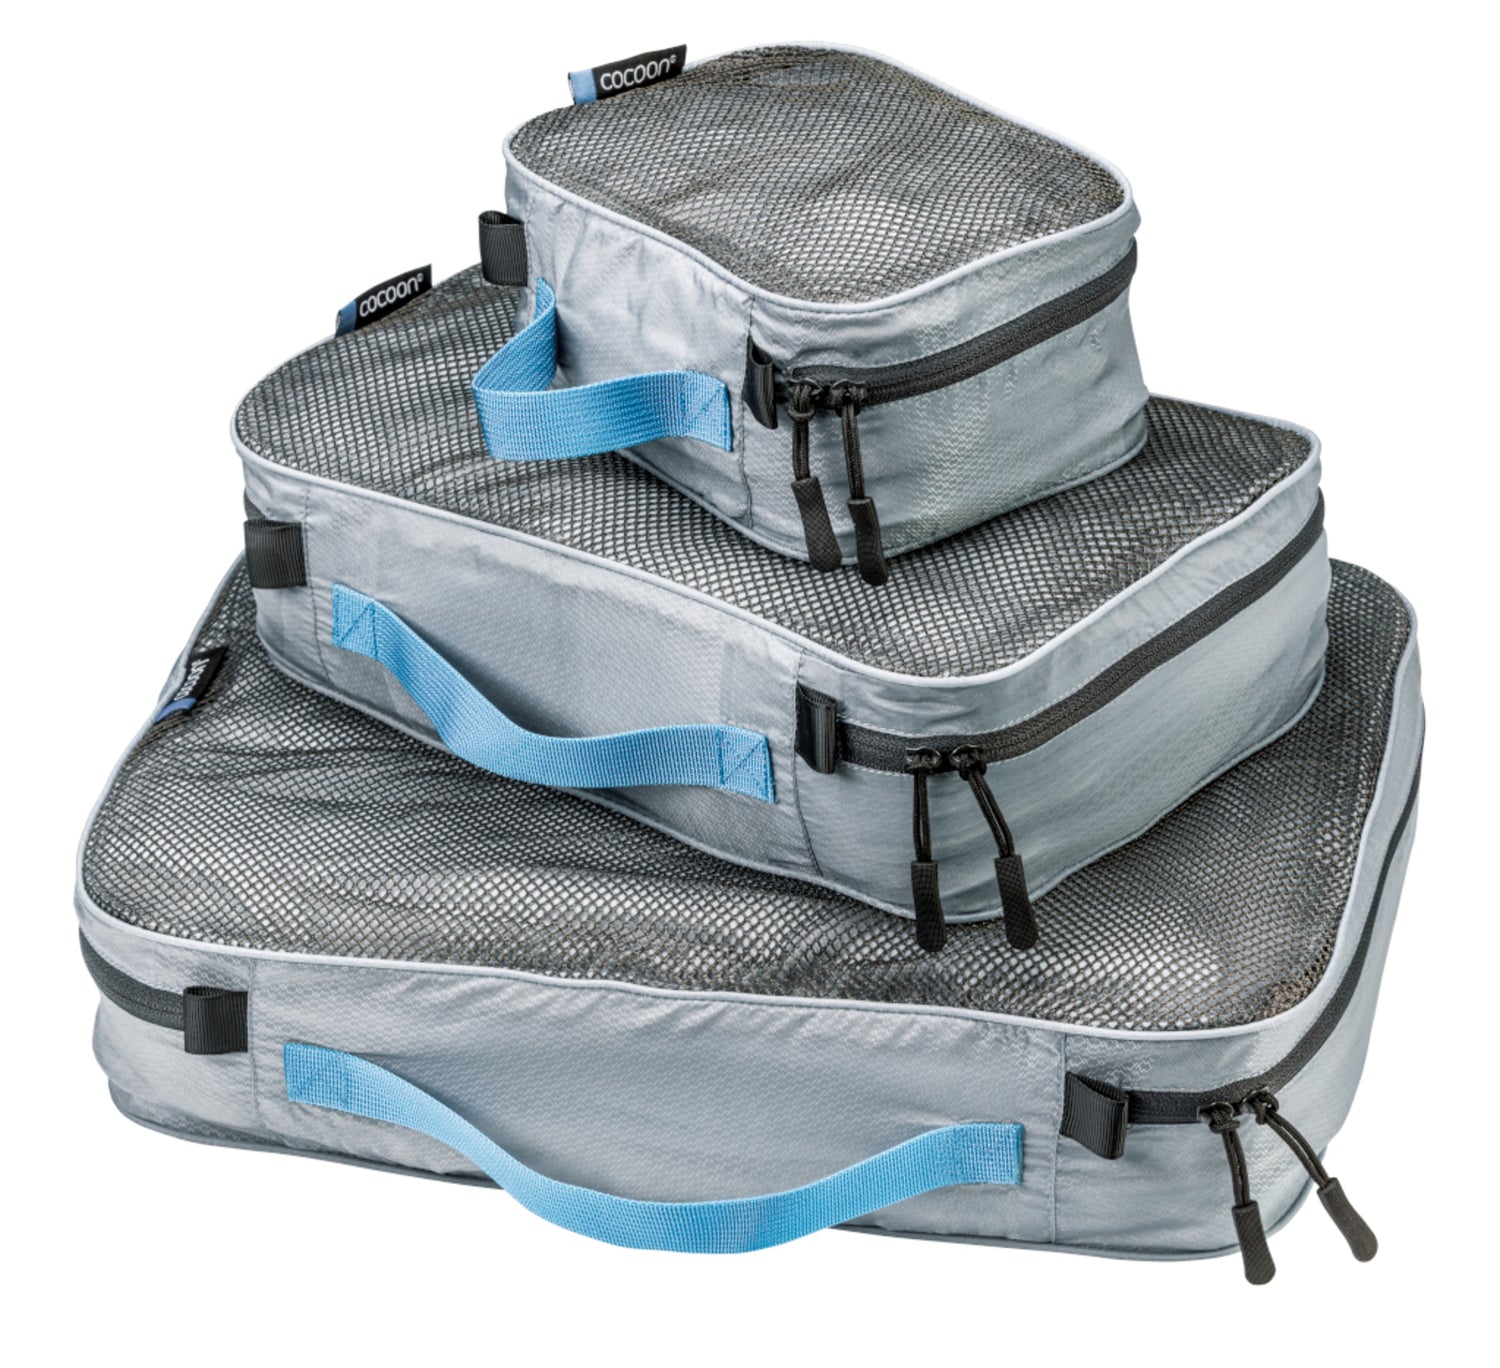 Cocoon Packing Cubes Ultralight Size S storm blue